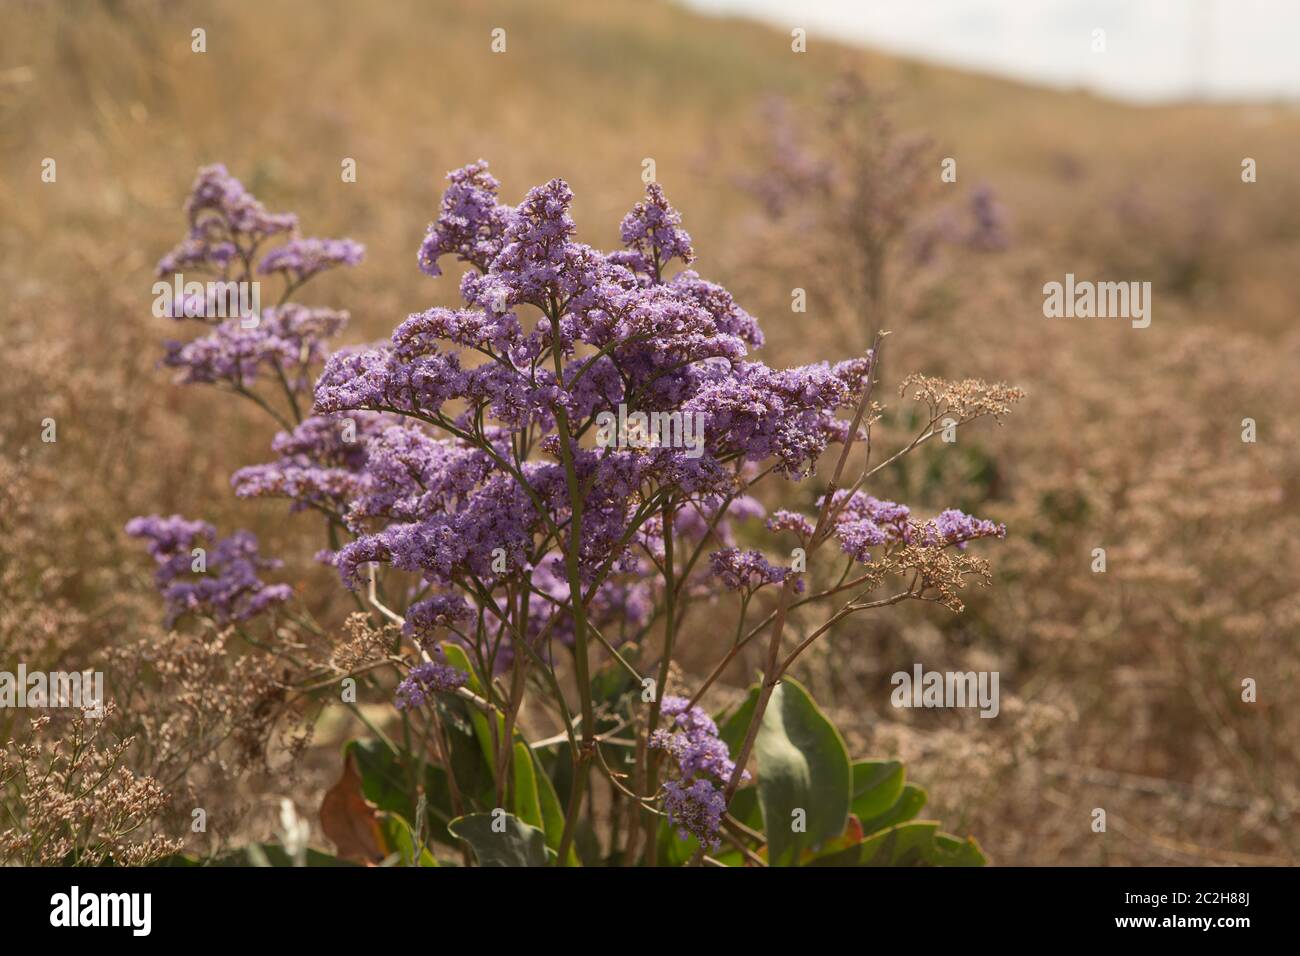 Stem of Limonium vulgare Mill with flowers on nature background Stock Photo